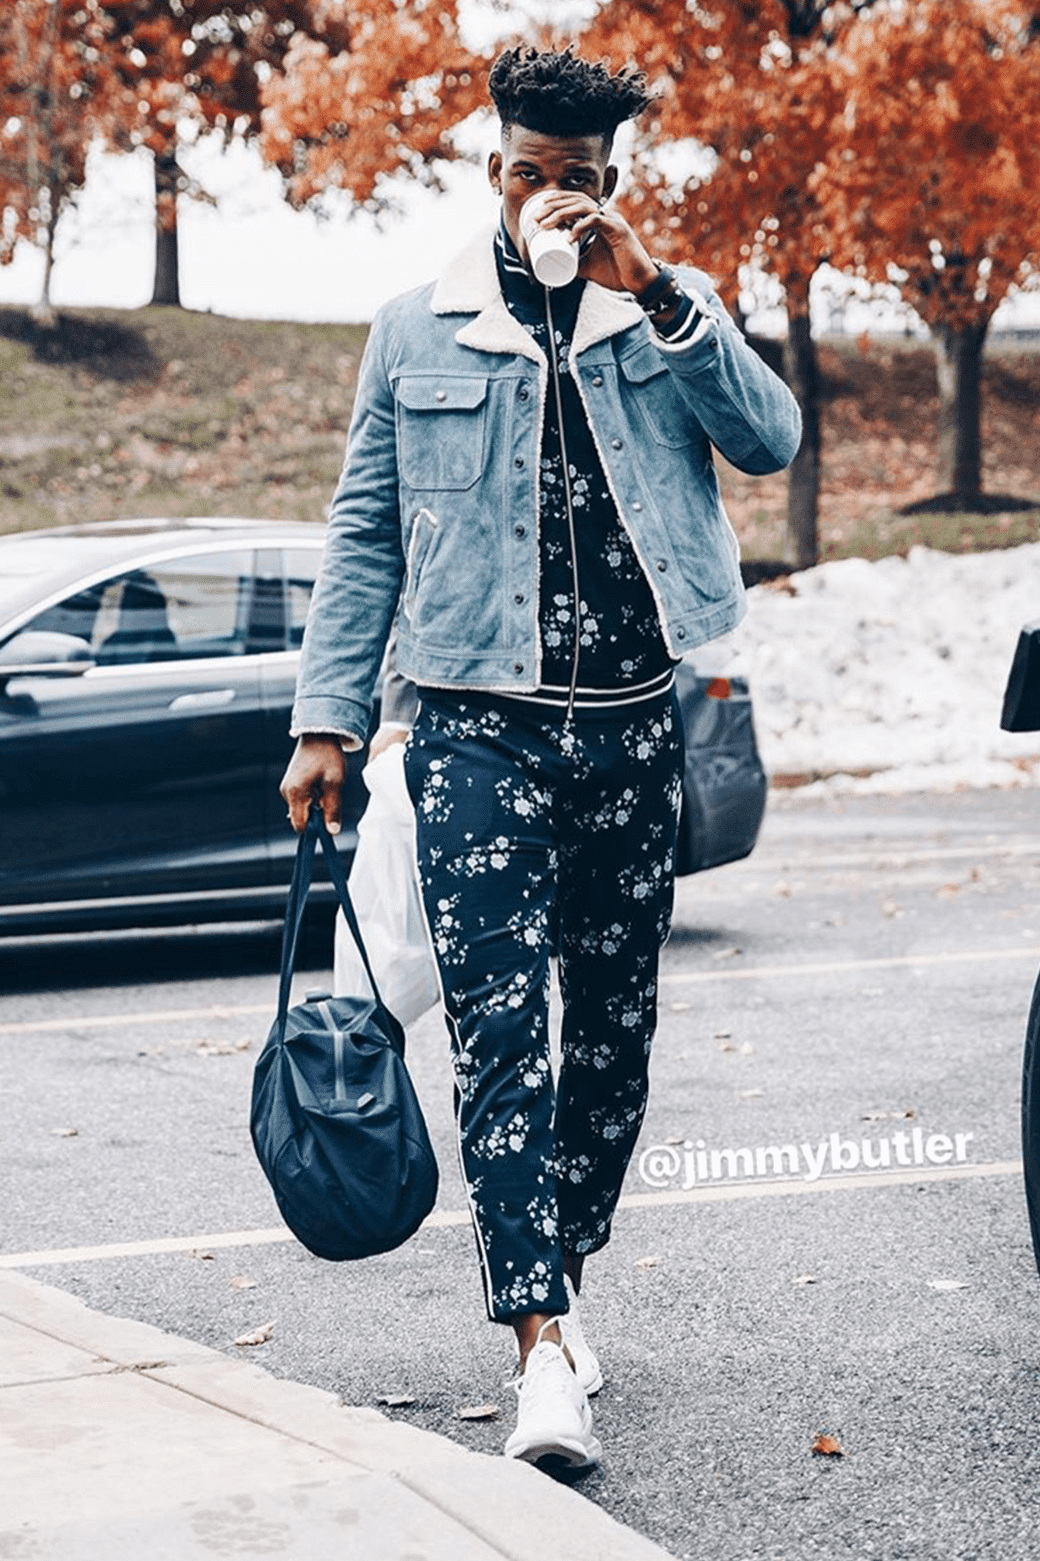 jimmy butler outfit